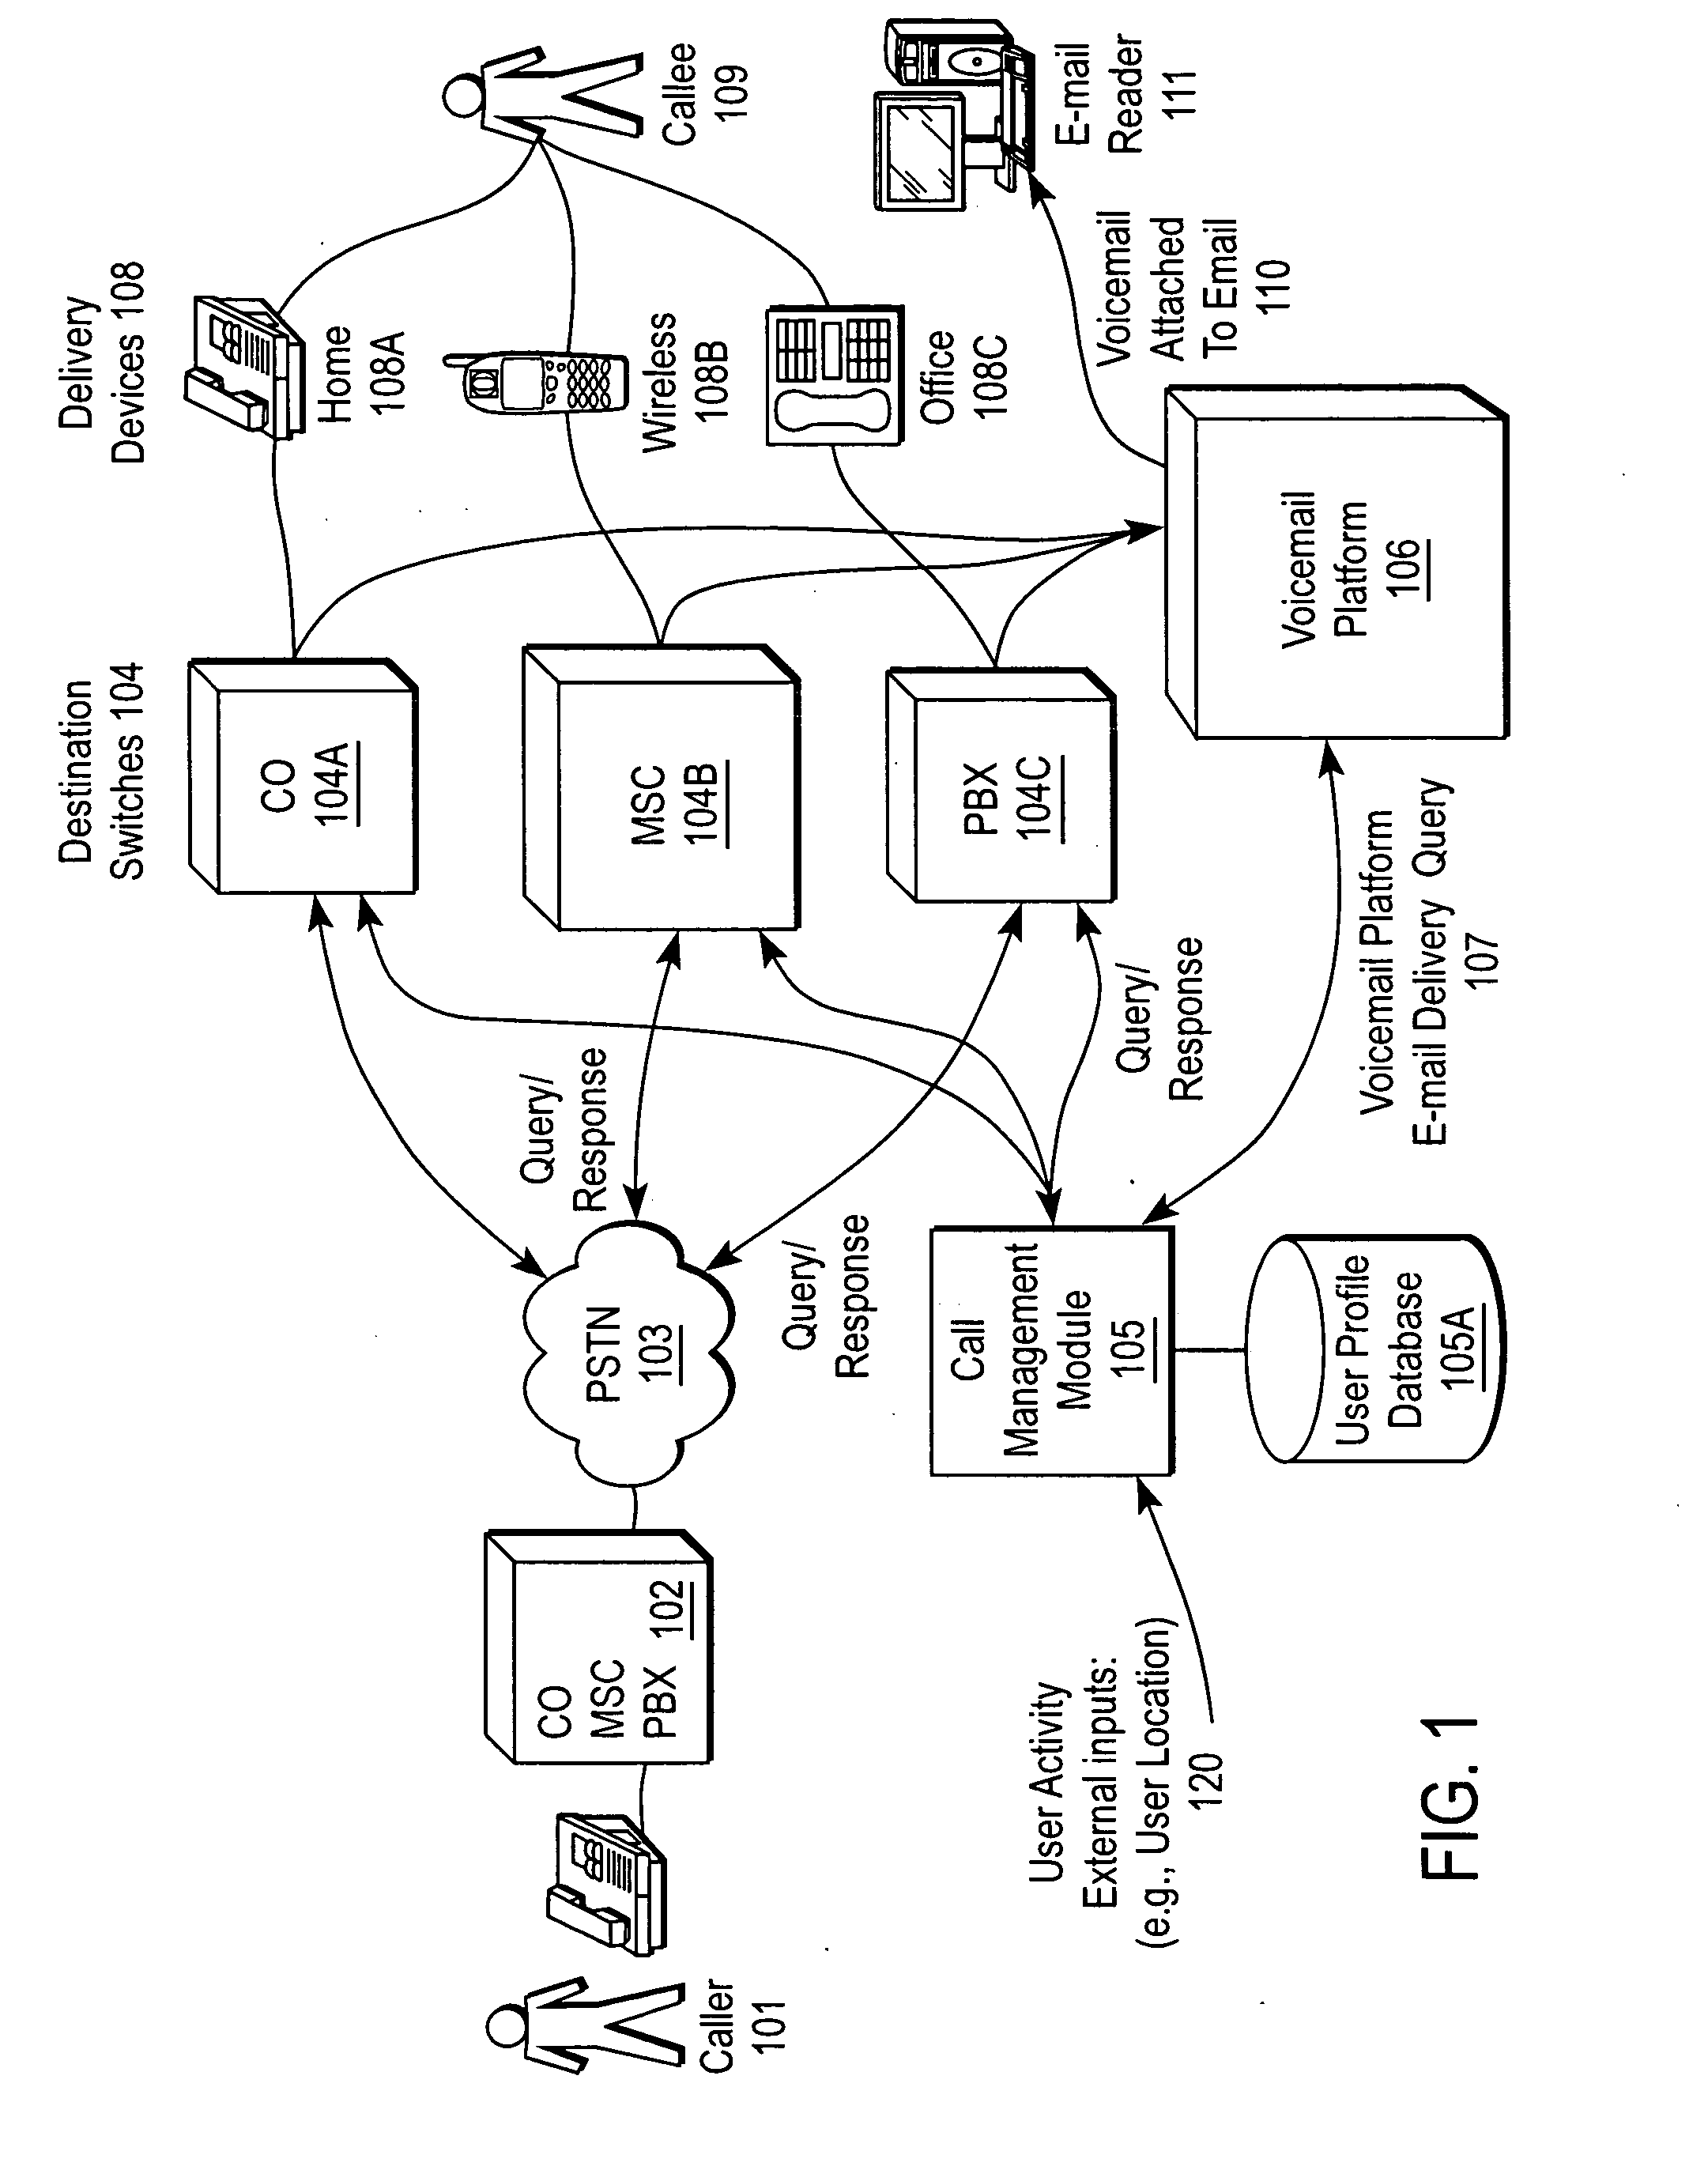 Wireless device to manage cross-network telecommunication services